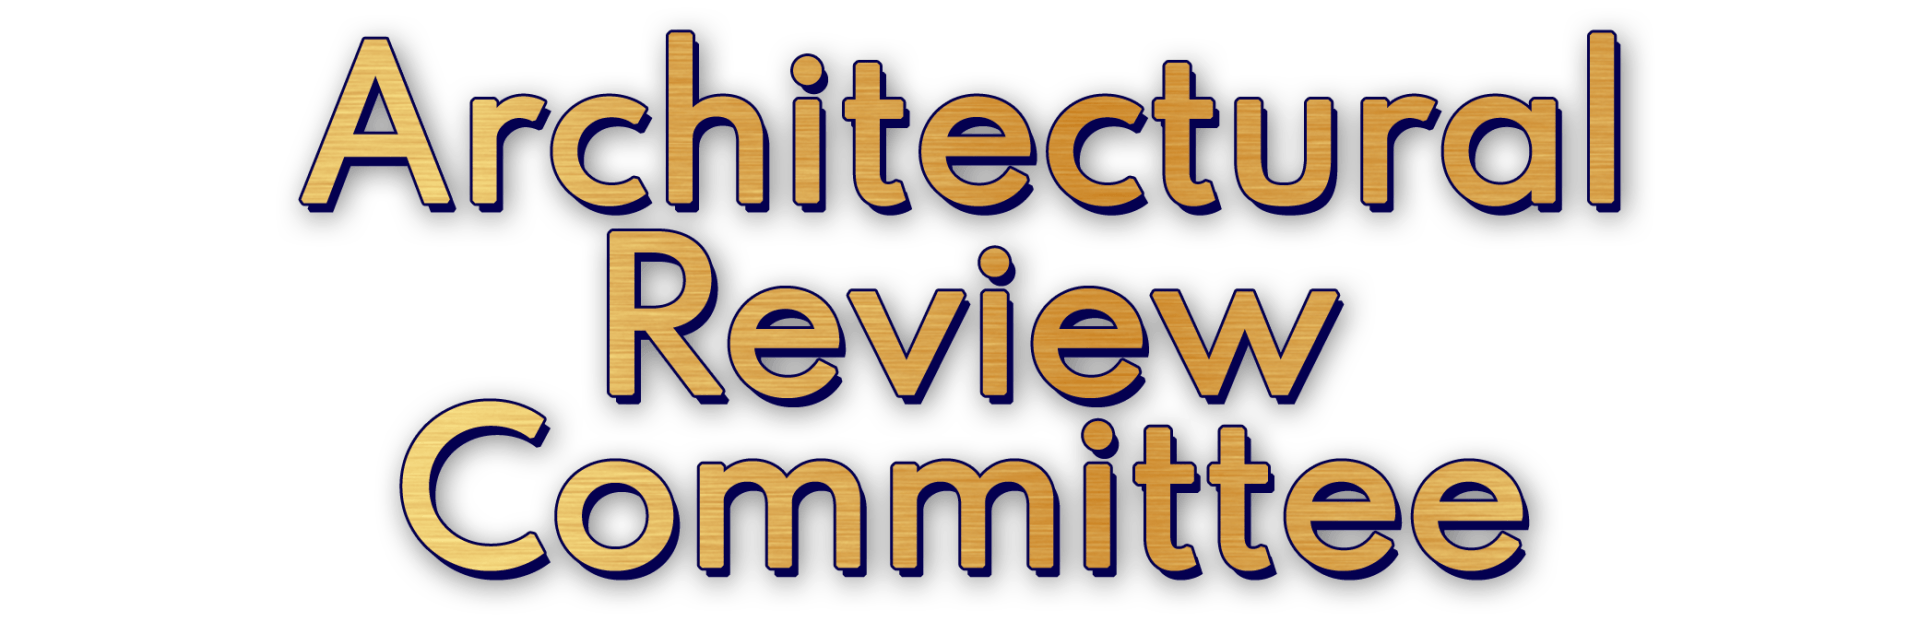 A logo for the architectural review committee